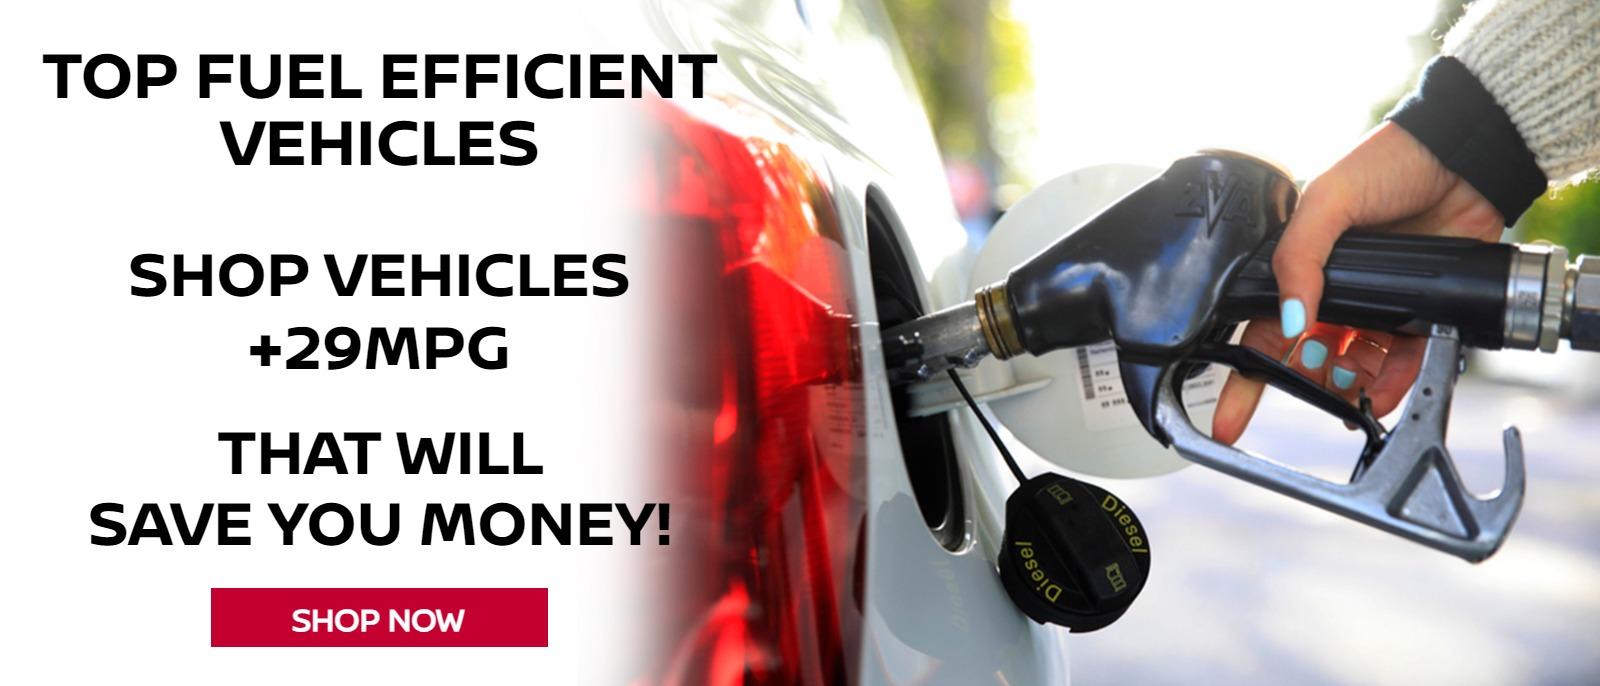 Fuel Efficient Vehicles
+29MPG vehicles that will save you money!